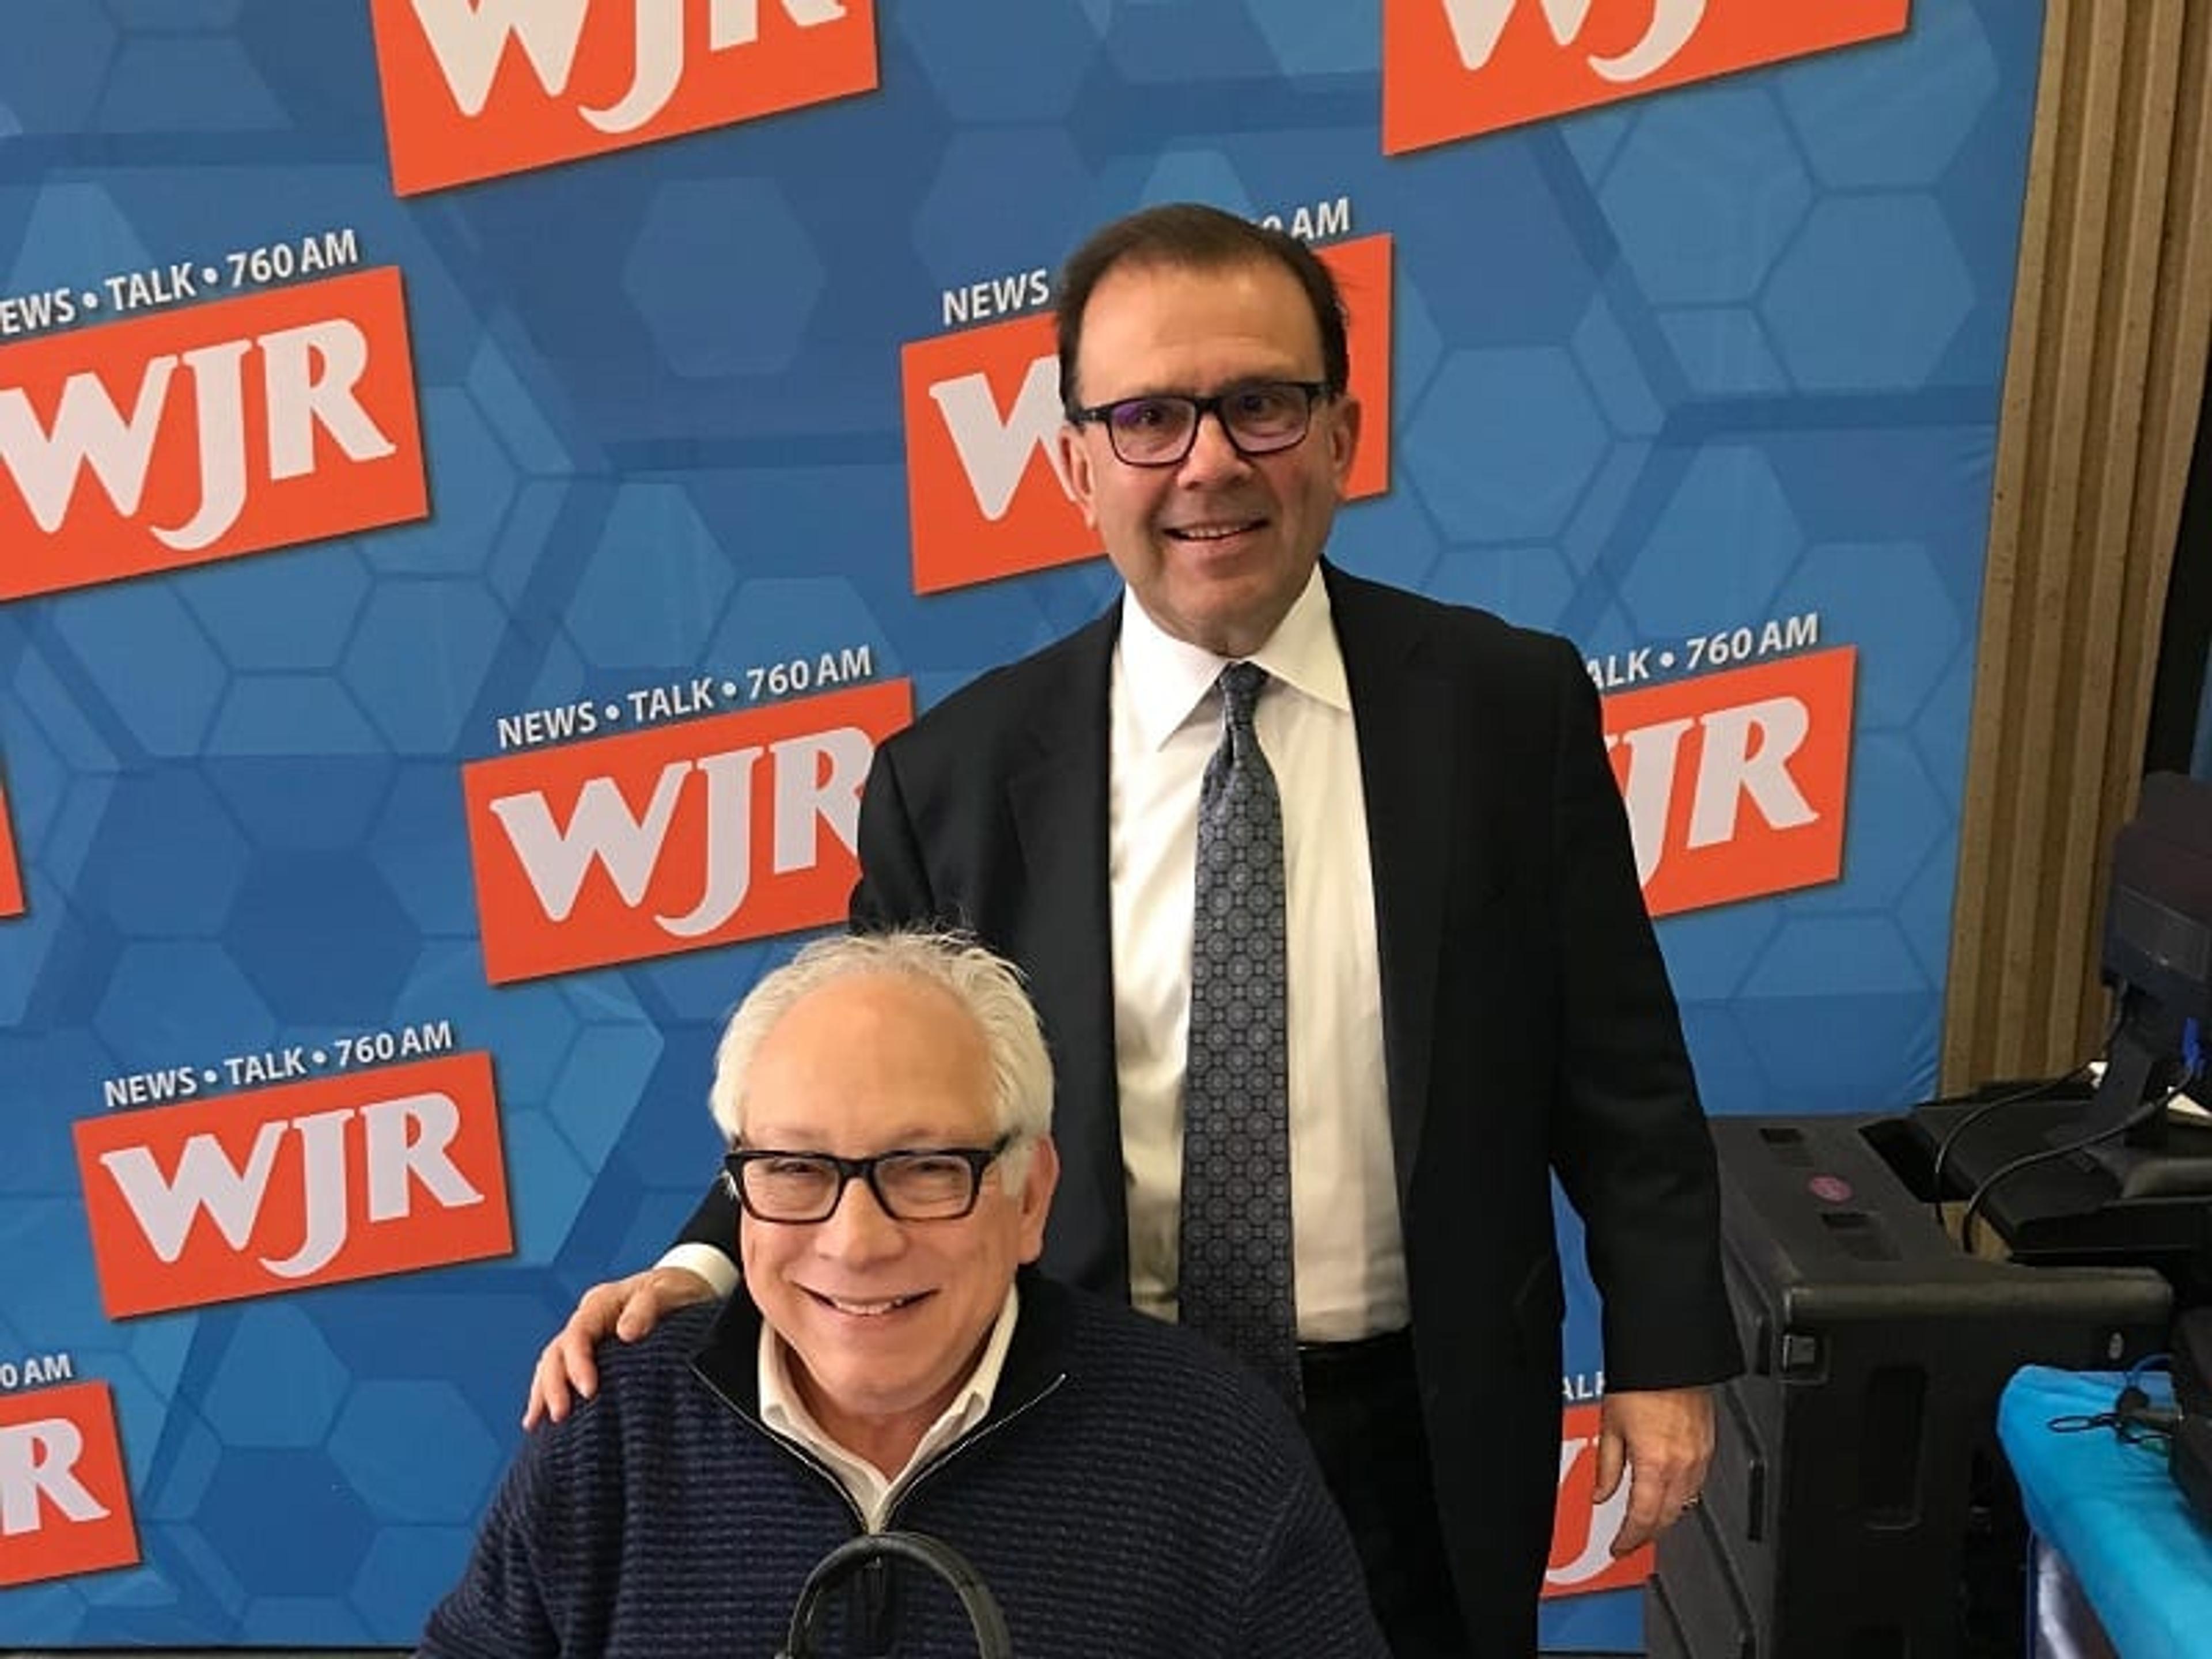 BCBSM CEO Daniel Loepp poses for a photo with WJR host Paul W. Smith